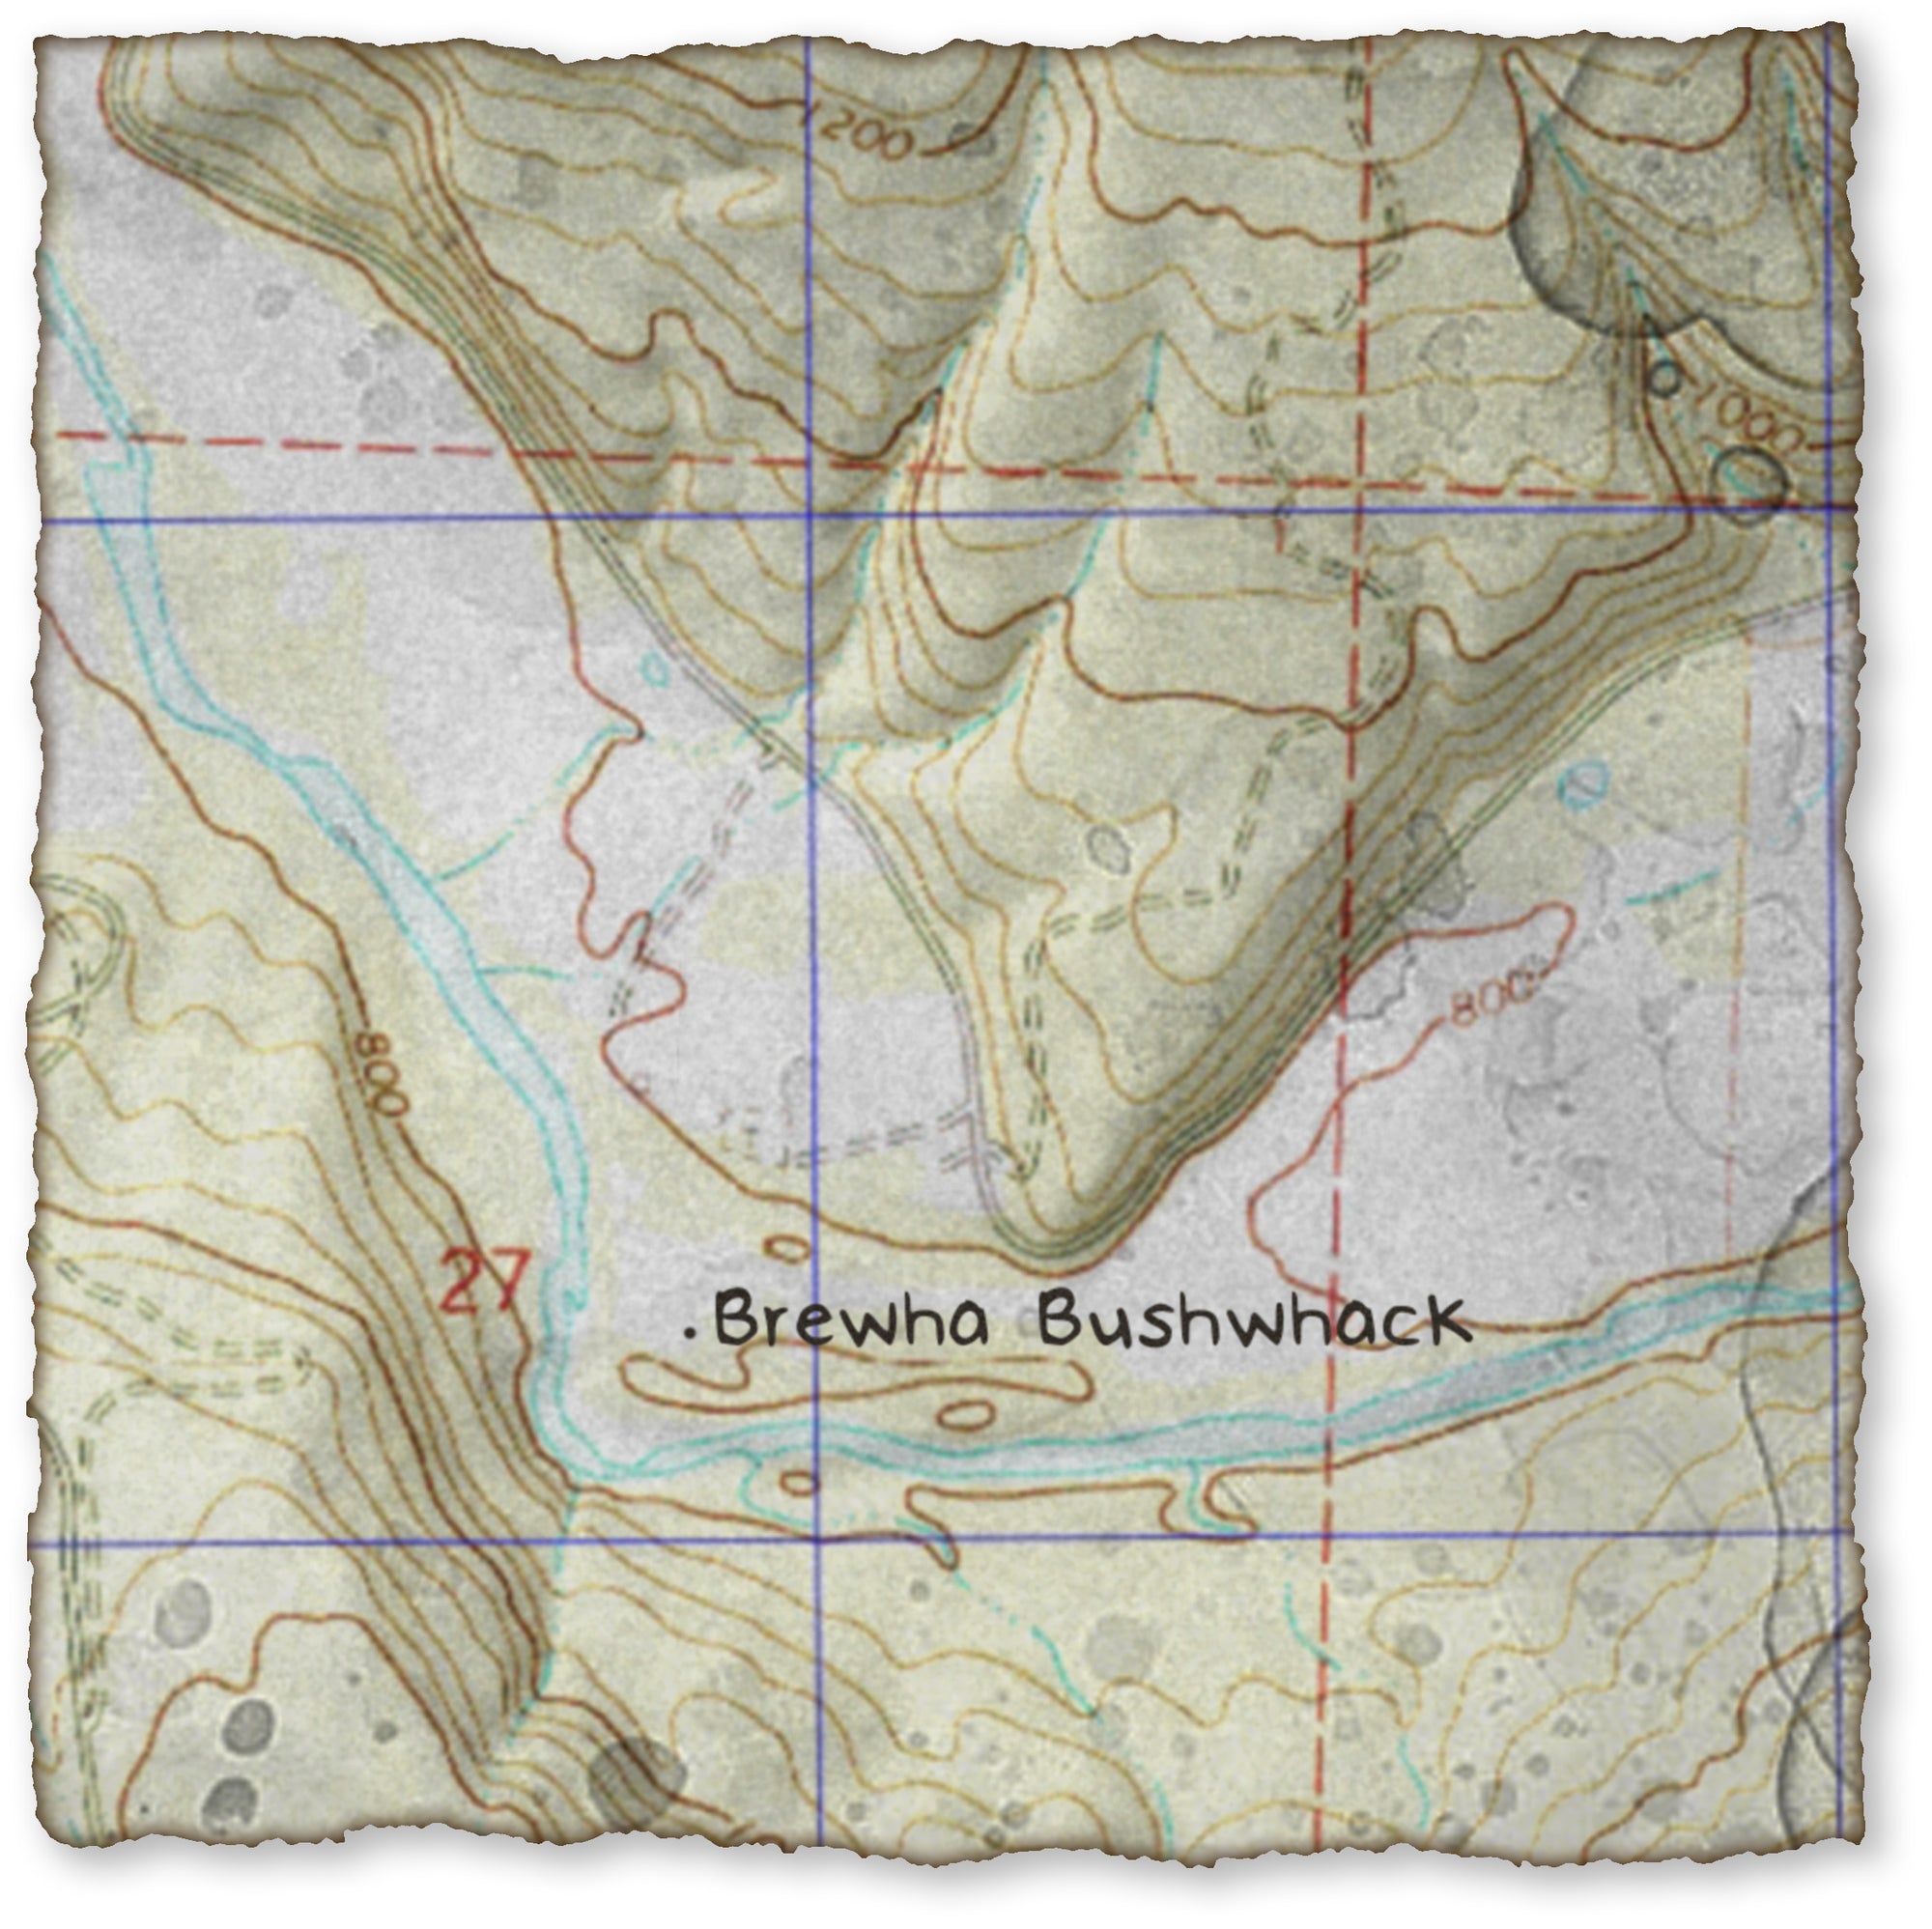 A worn topographical map with jagged, torn edges. The map depicts an aerial view of the Mulberry River valley at Byrd's Adventure Center, and has a spot marked "Brewha Bushwhack."